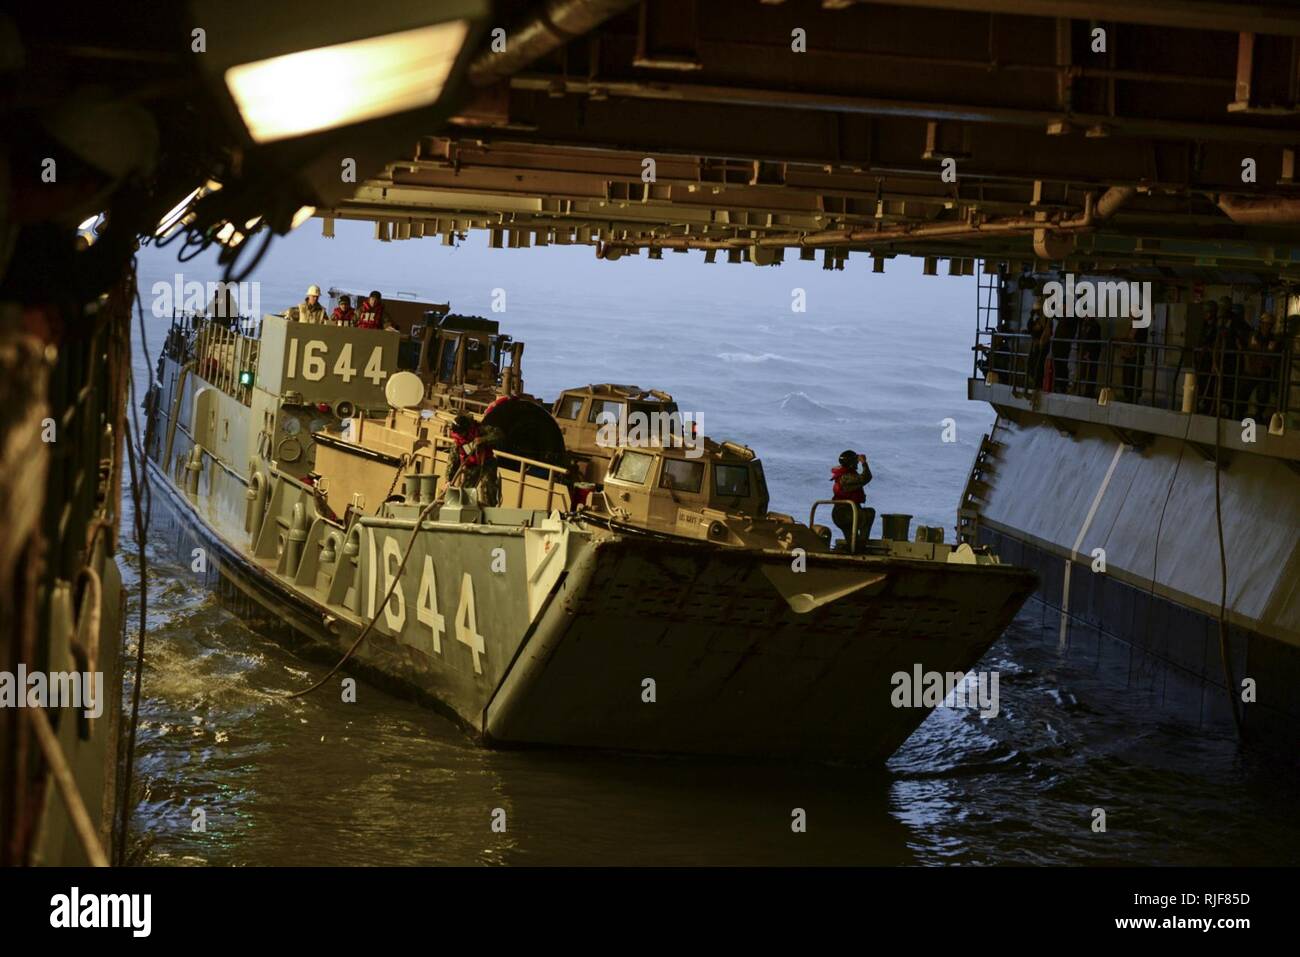 NORFOLK (Oct. 8, 2016) Landing Craft Utility (LCU) 1644, attached to Assault Craft Unit (ACU) 2, enters the well deck of the amphibious assault ship USS Iwo Jima (LHD 7). Iwo Jima and the 24th Marine Expeditionary Unit (24th MEU) are preparing to provide disaster relief and humanitarian aid to Haiti following Hurricane Matthew. Stock Photo